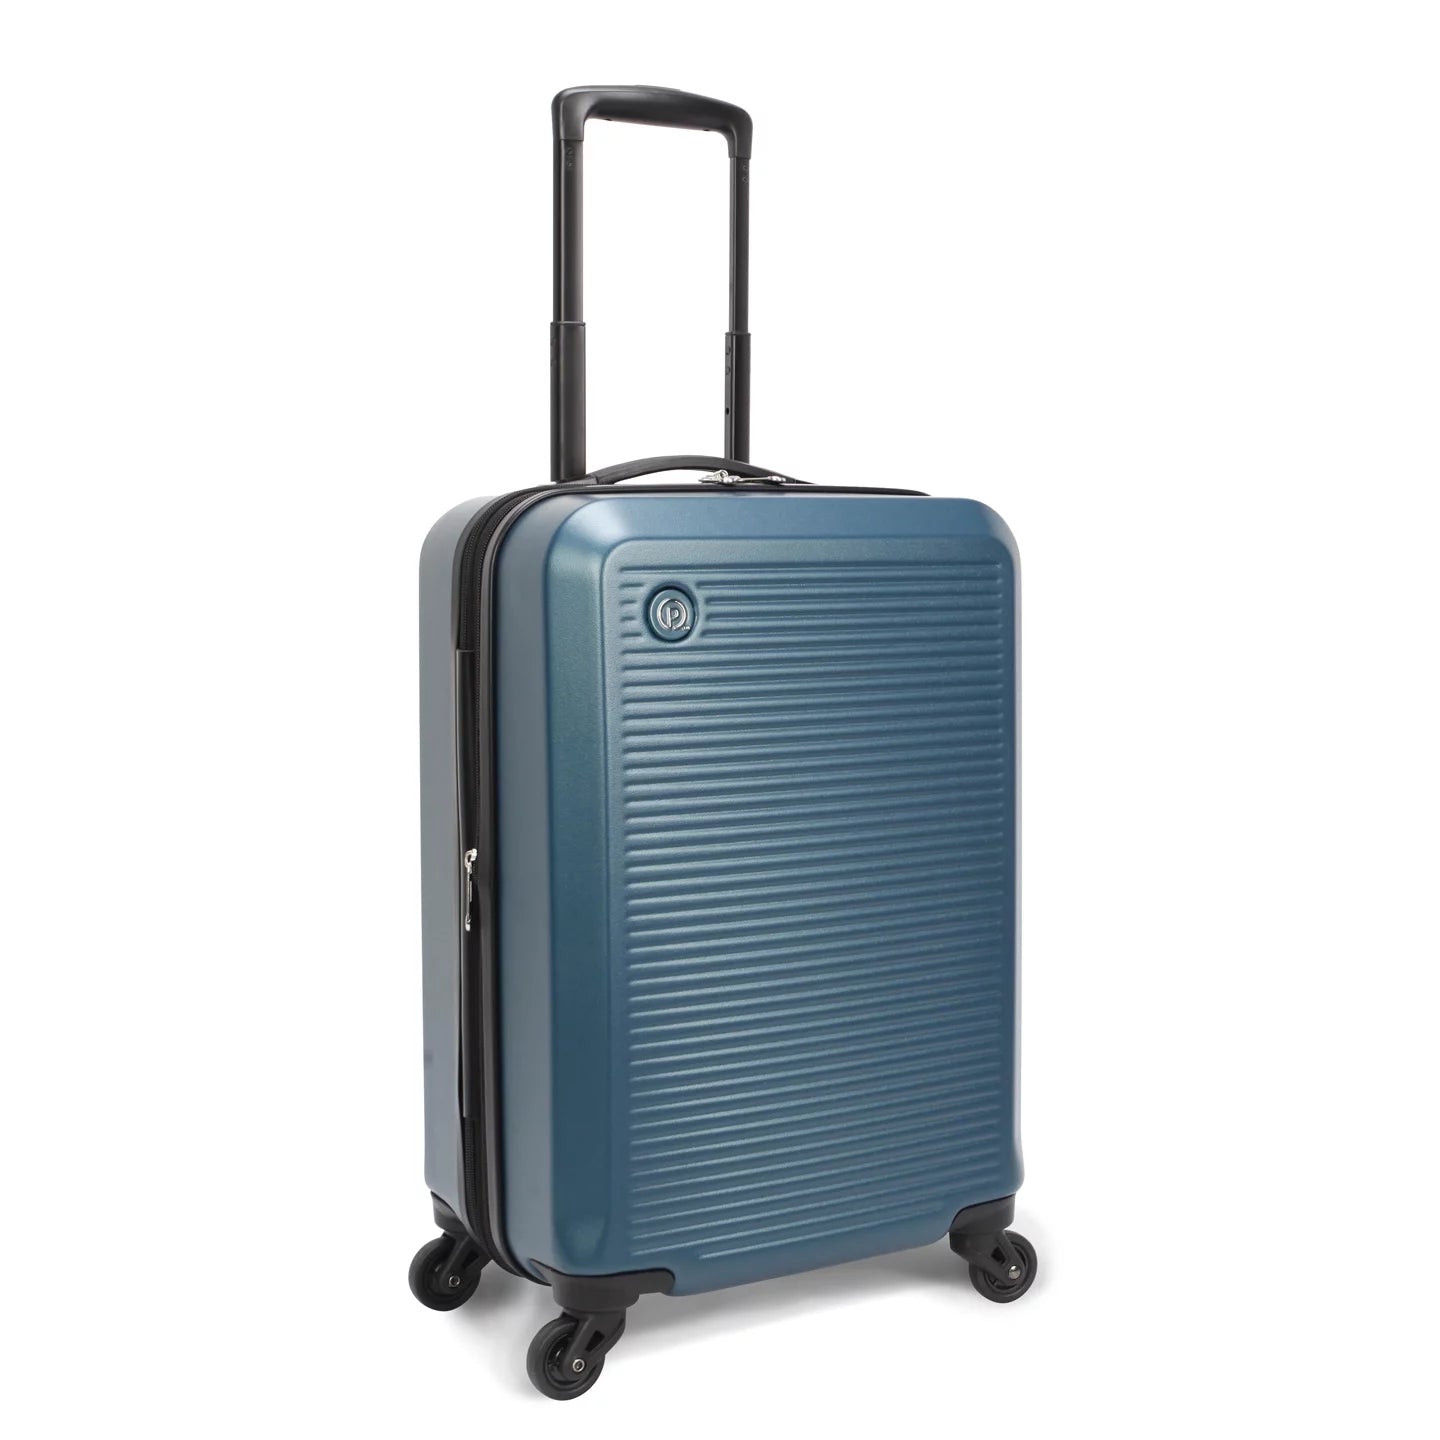 Protege Carry-On Spinner Luggage (10 Colors)